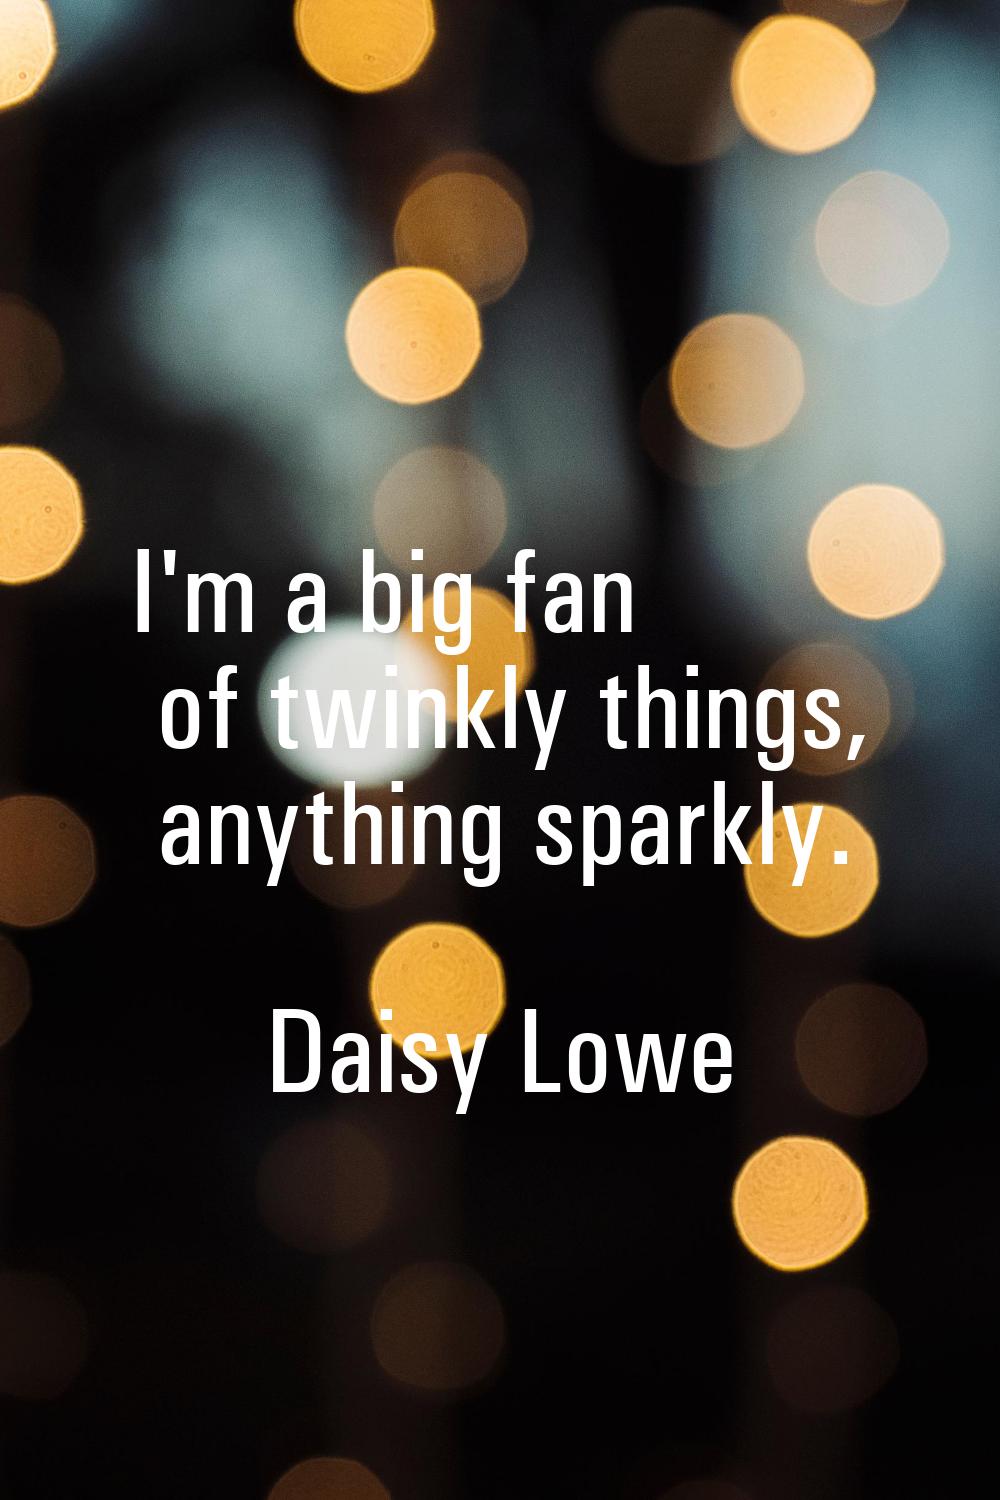 I'm a big fan of twinkly things, anything sparkly.